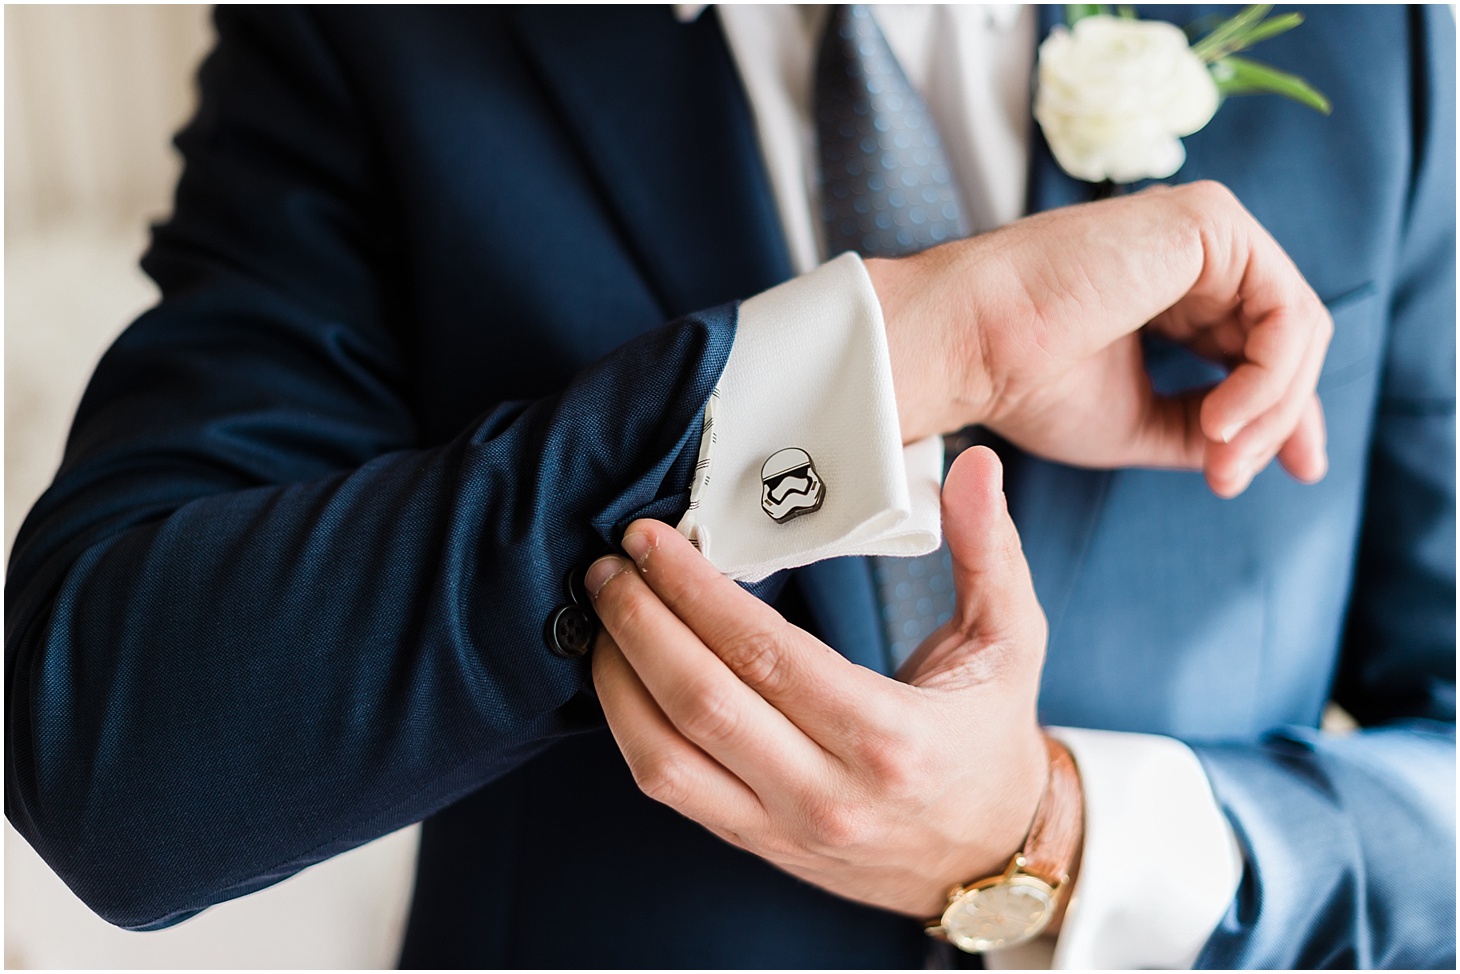 Groom Getting Ready at The Hay-Adams Hotel with Storm Trooper Cuff Links, Industrial-Chic Wedding at Long View Gallery in DC, Sarah Bradshaw Photography, DC Wedding Photographer